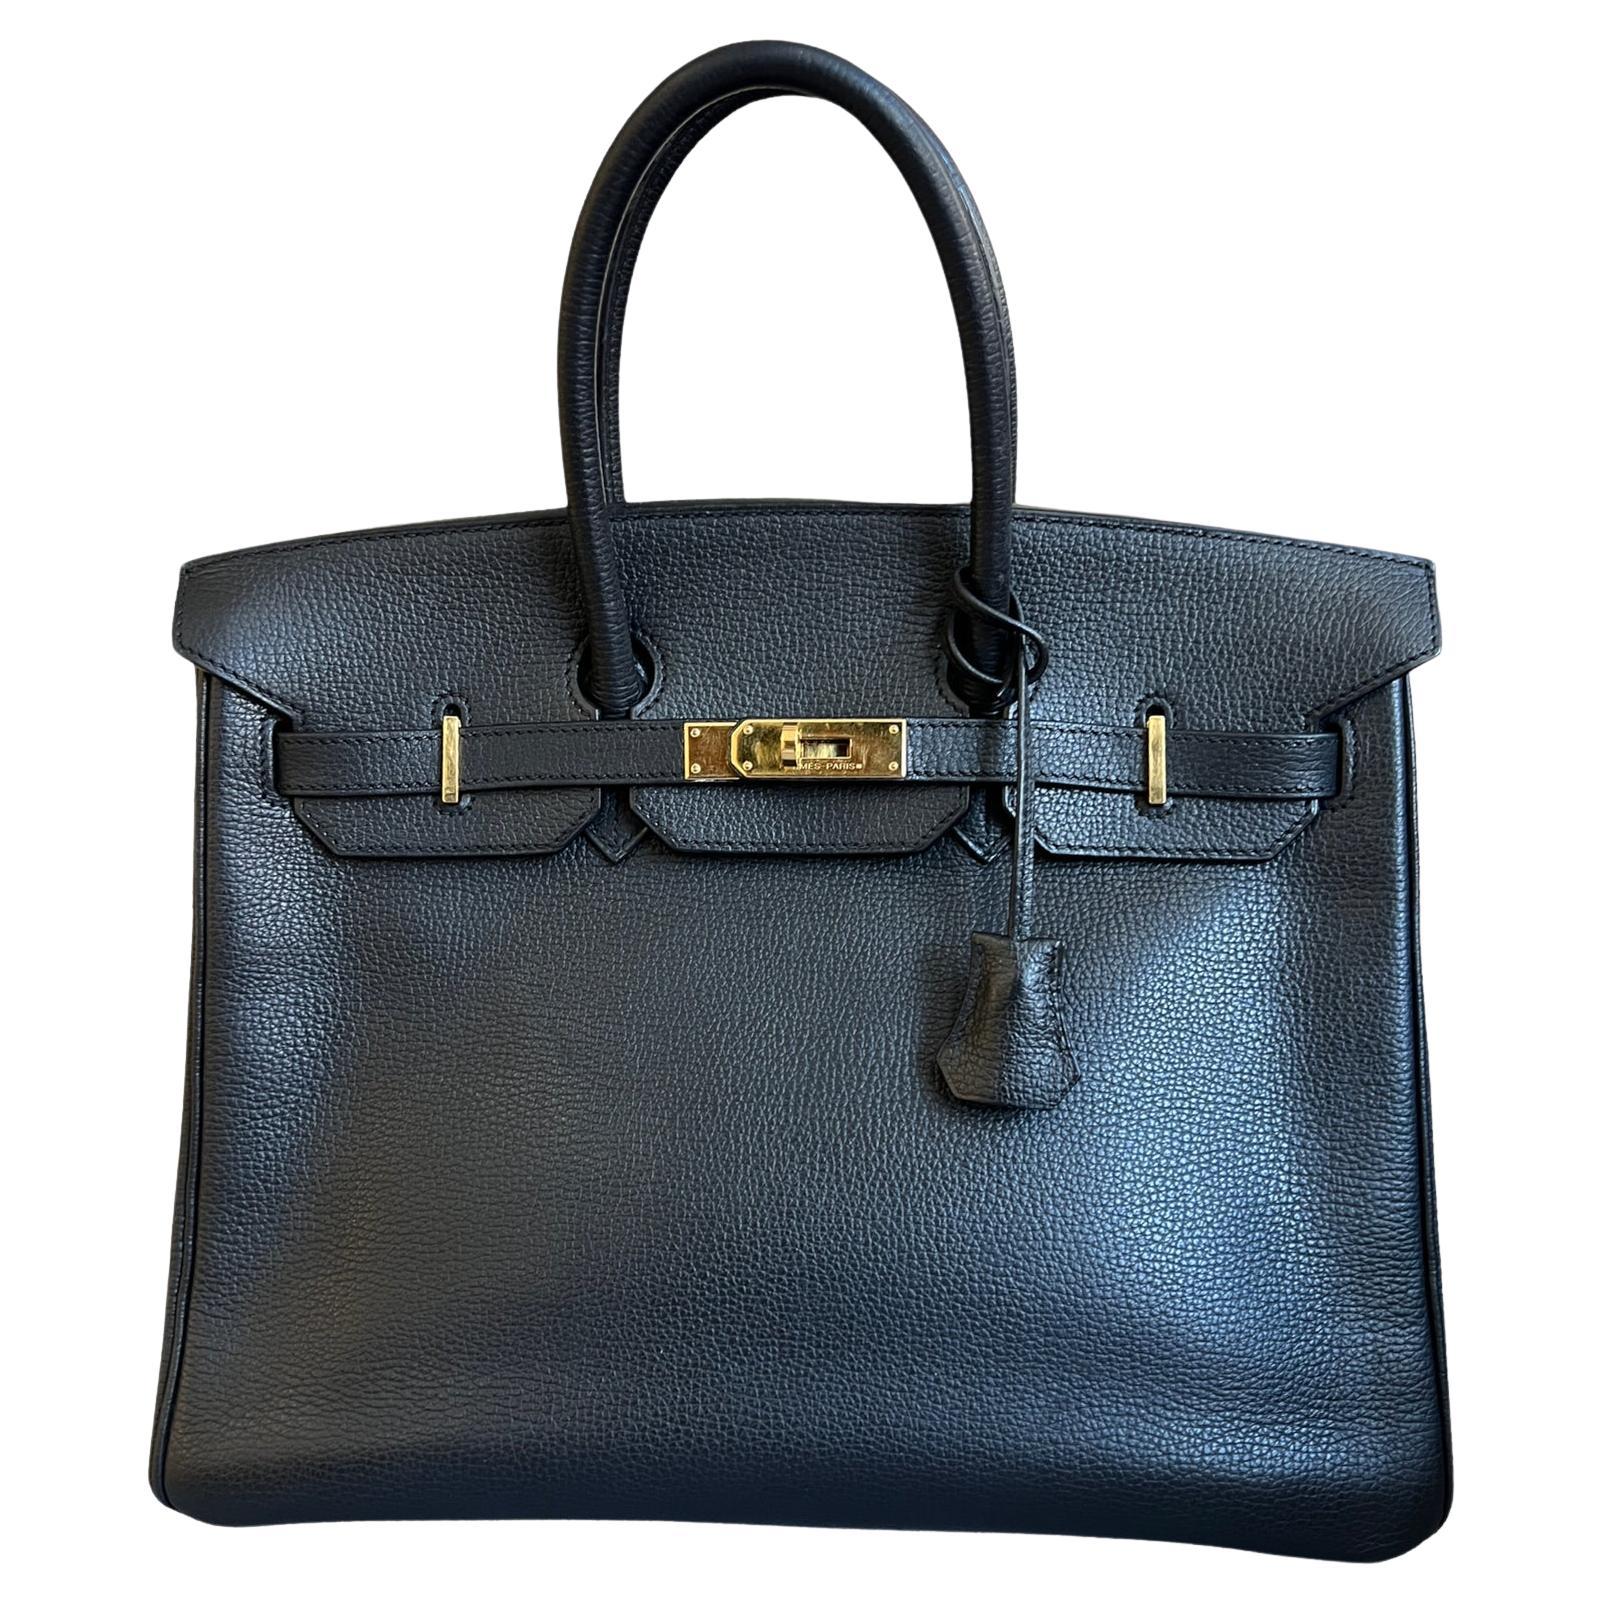 Hermes Birkin 35 Black Vache Liegée leather with Gold Hardware For Sale